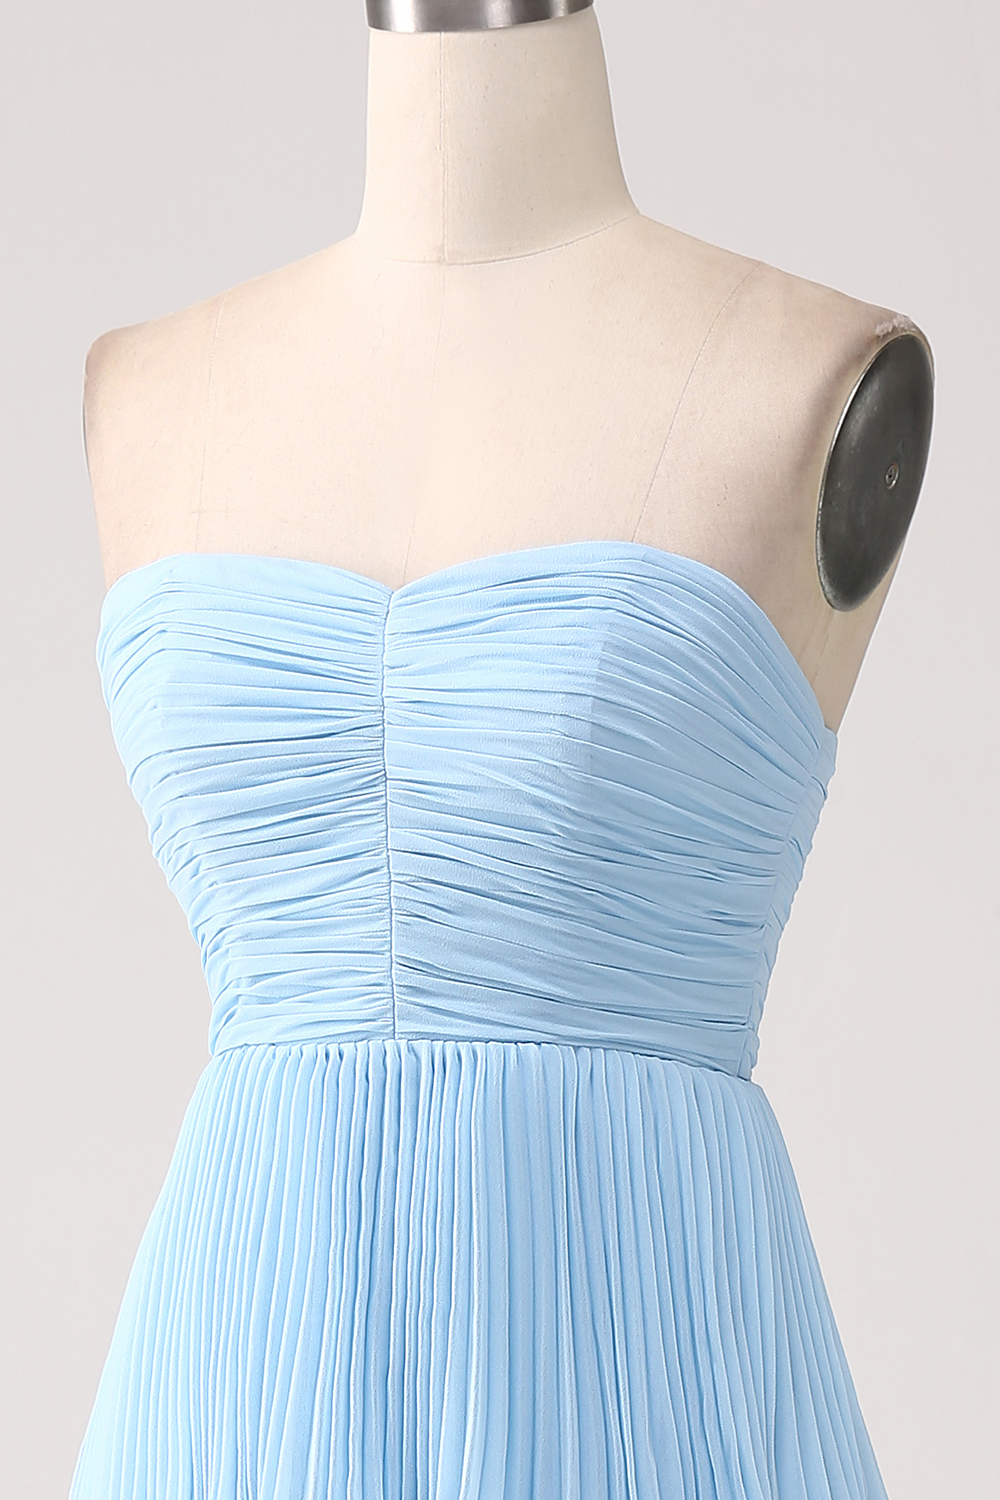 Sky Blue Strapless Tiered Long Bridesmaid Dress